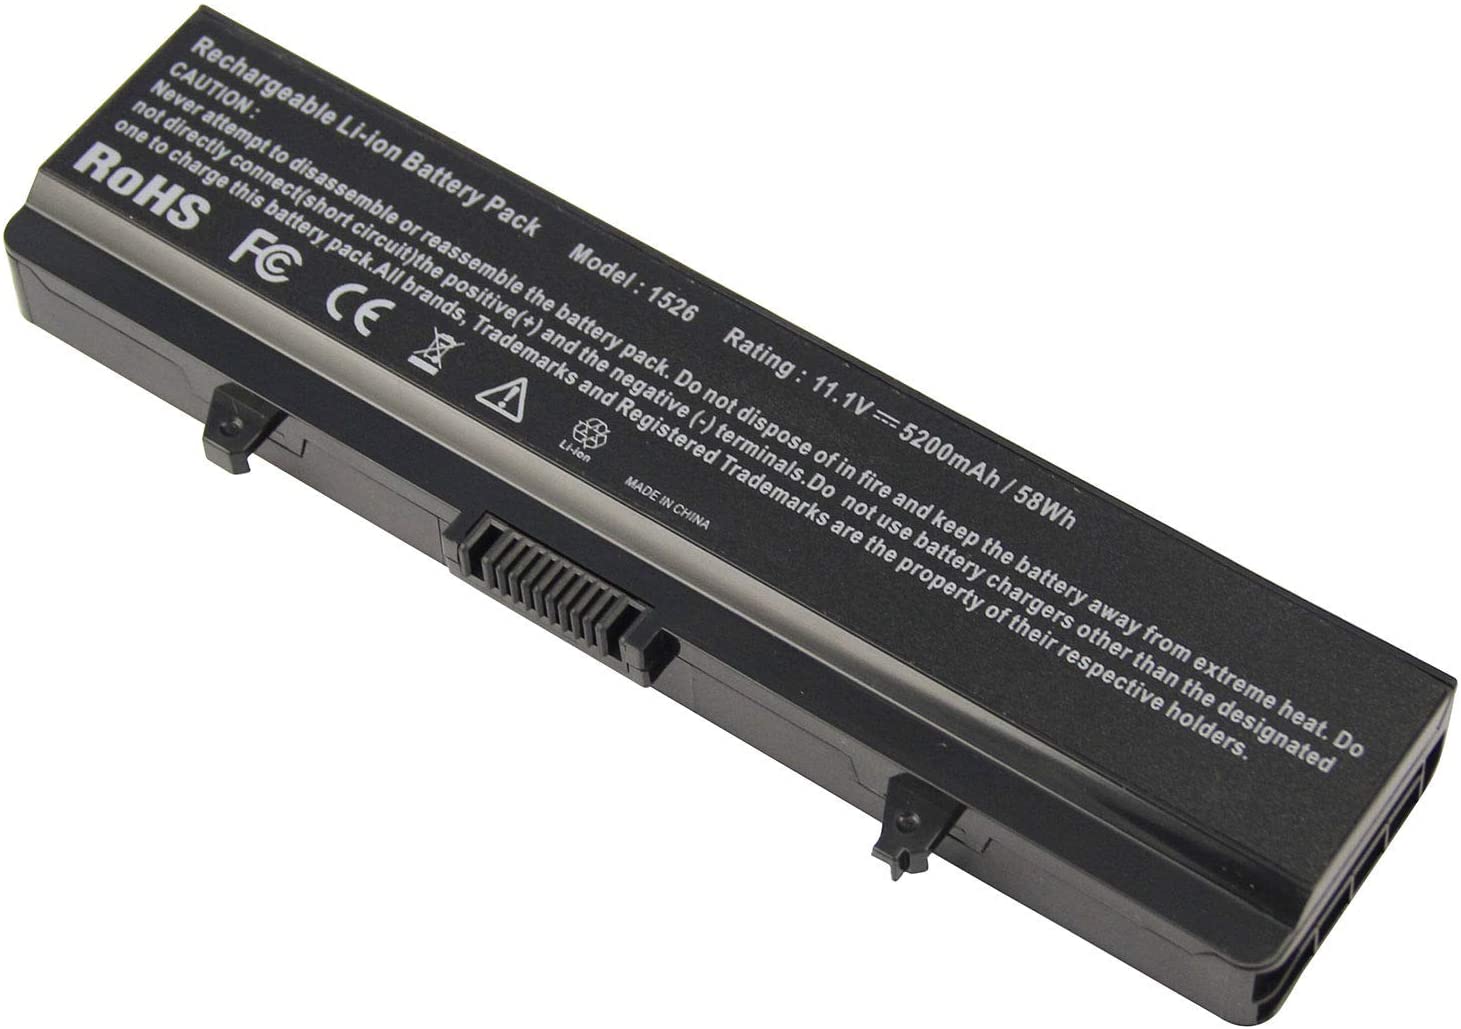 YD165 | Dell 6 Cell 56WHr Lithium-Ion Battery for Dell Latitude D520 Laptop